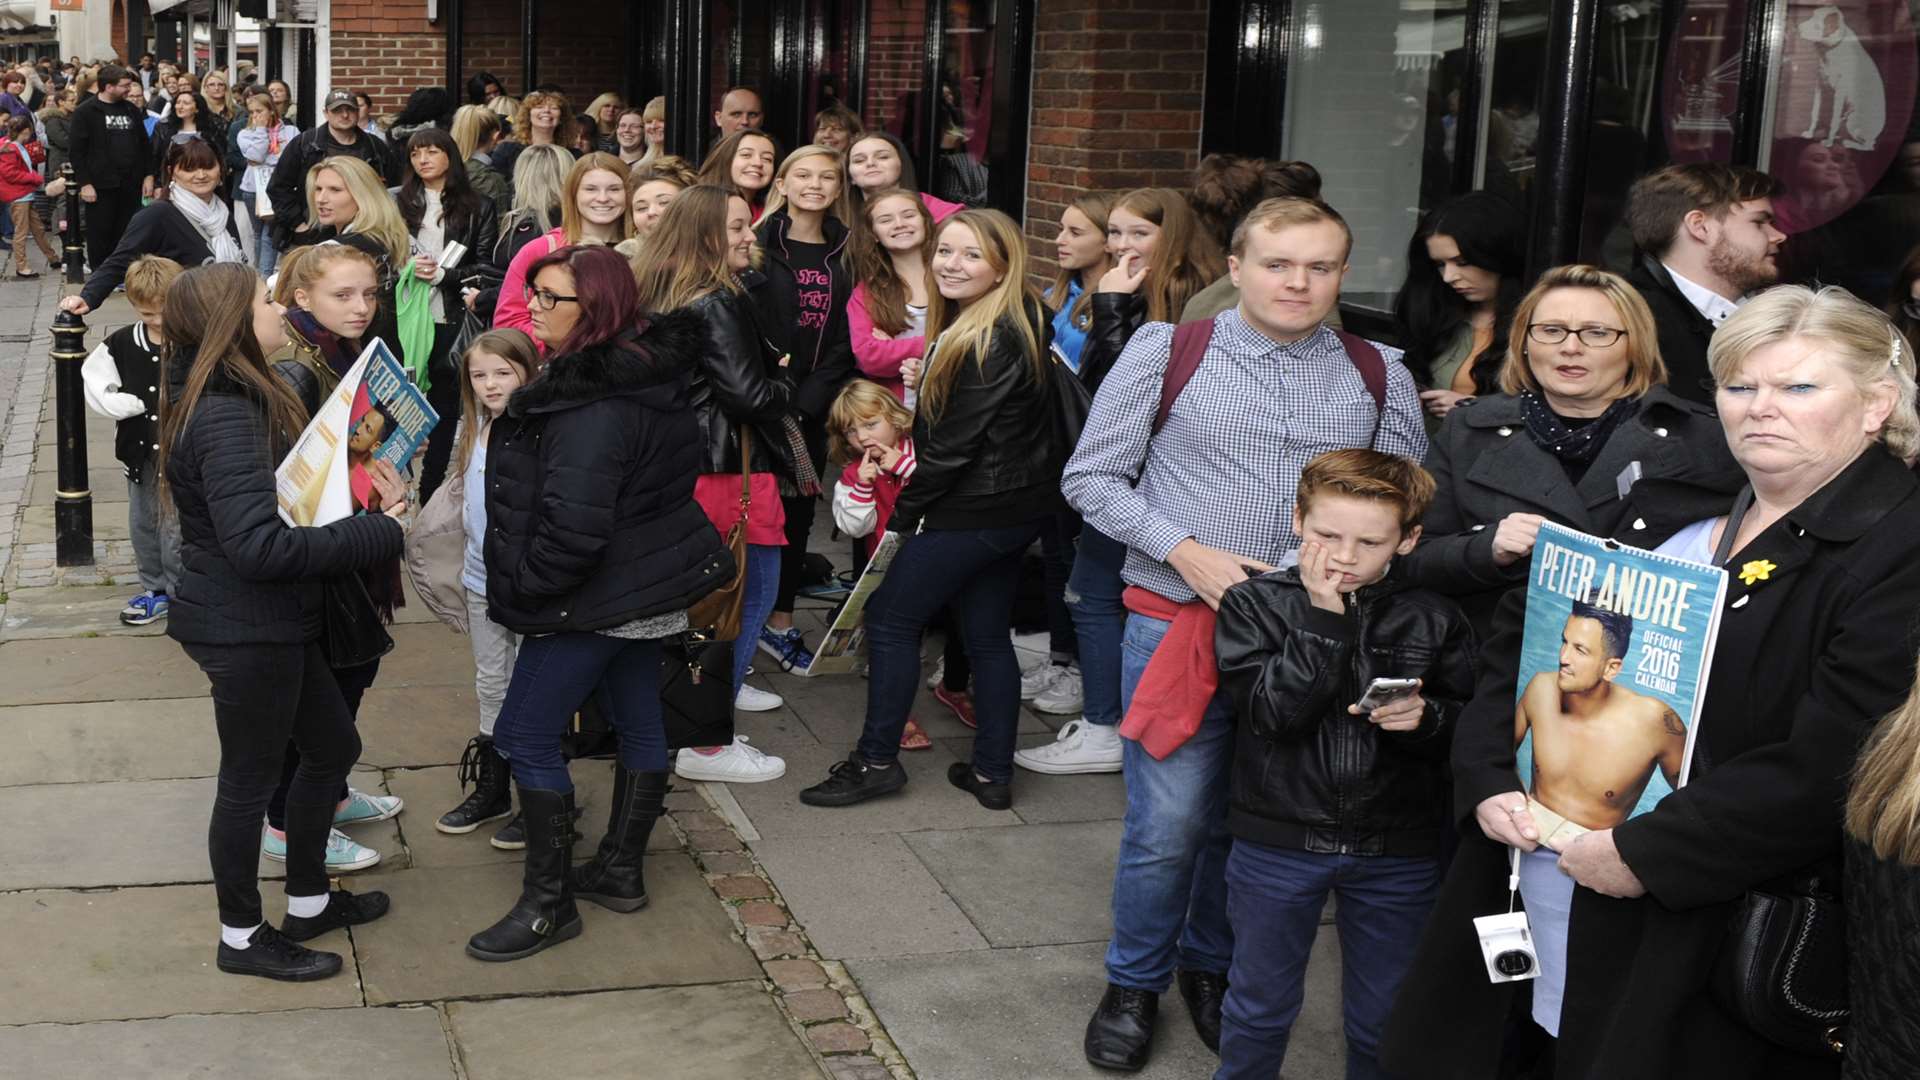 The queue builds outside HMV Canterbury for the arrival of Peter Andre